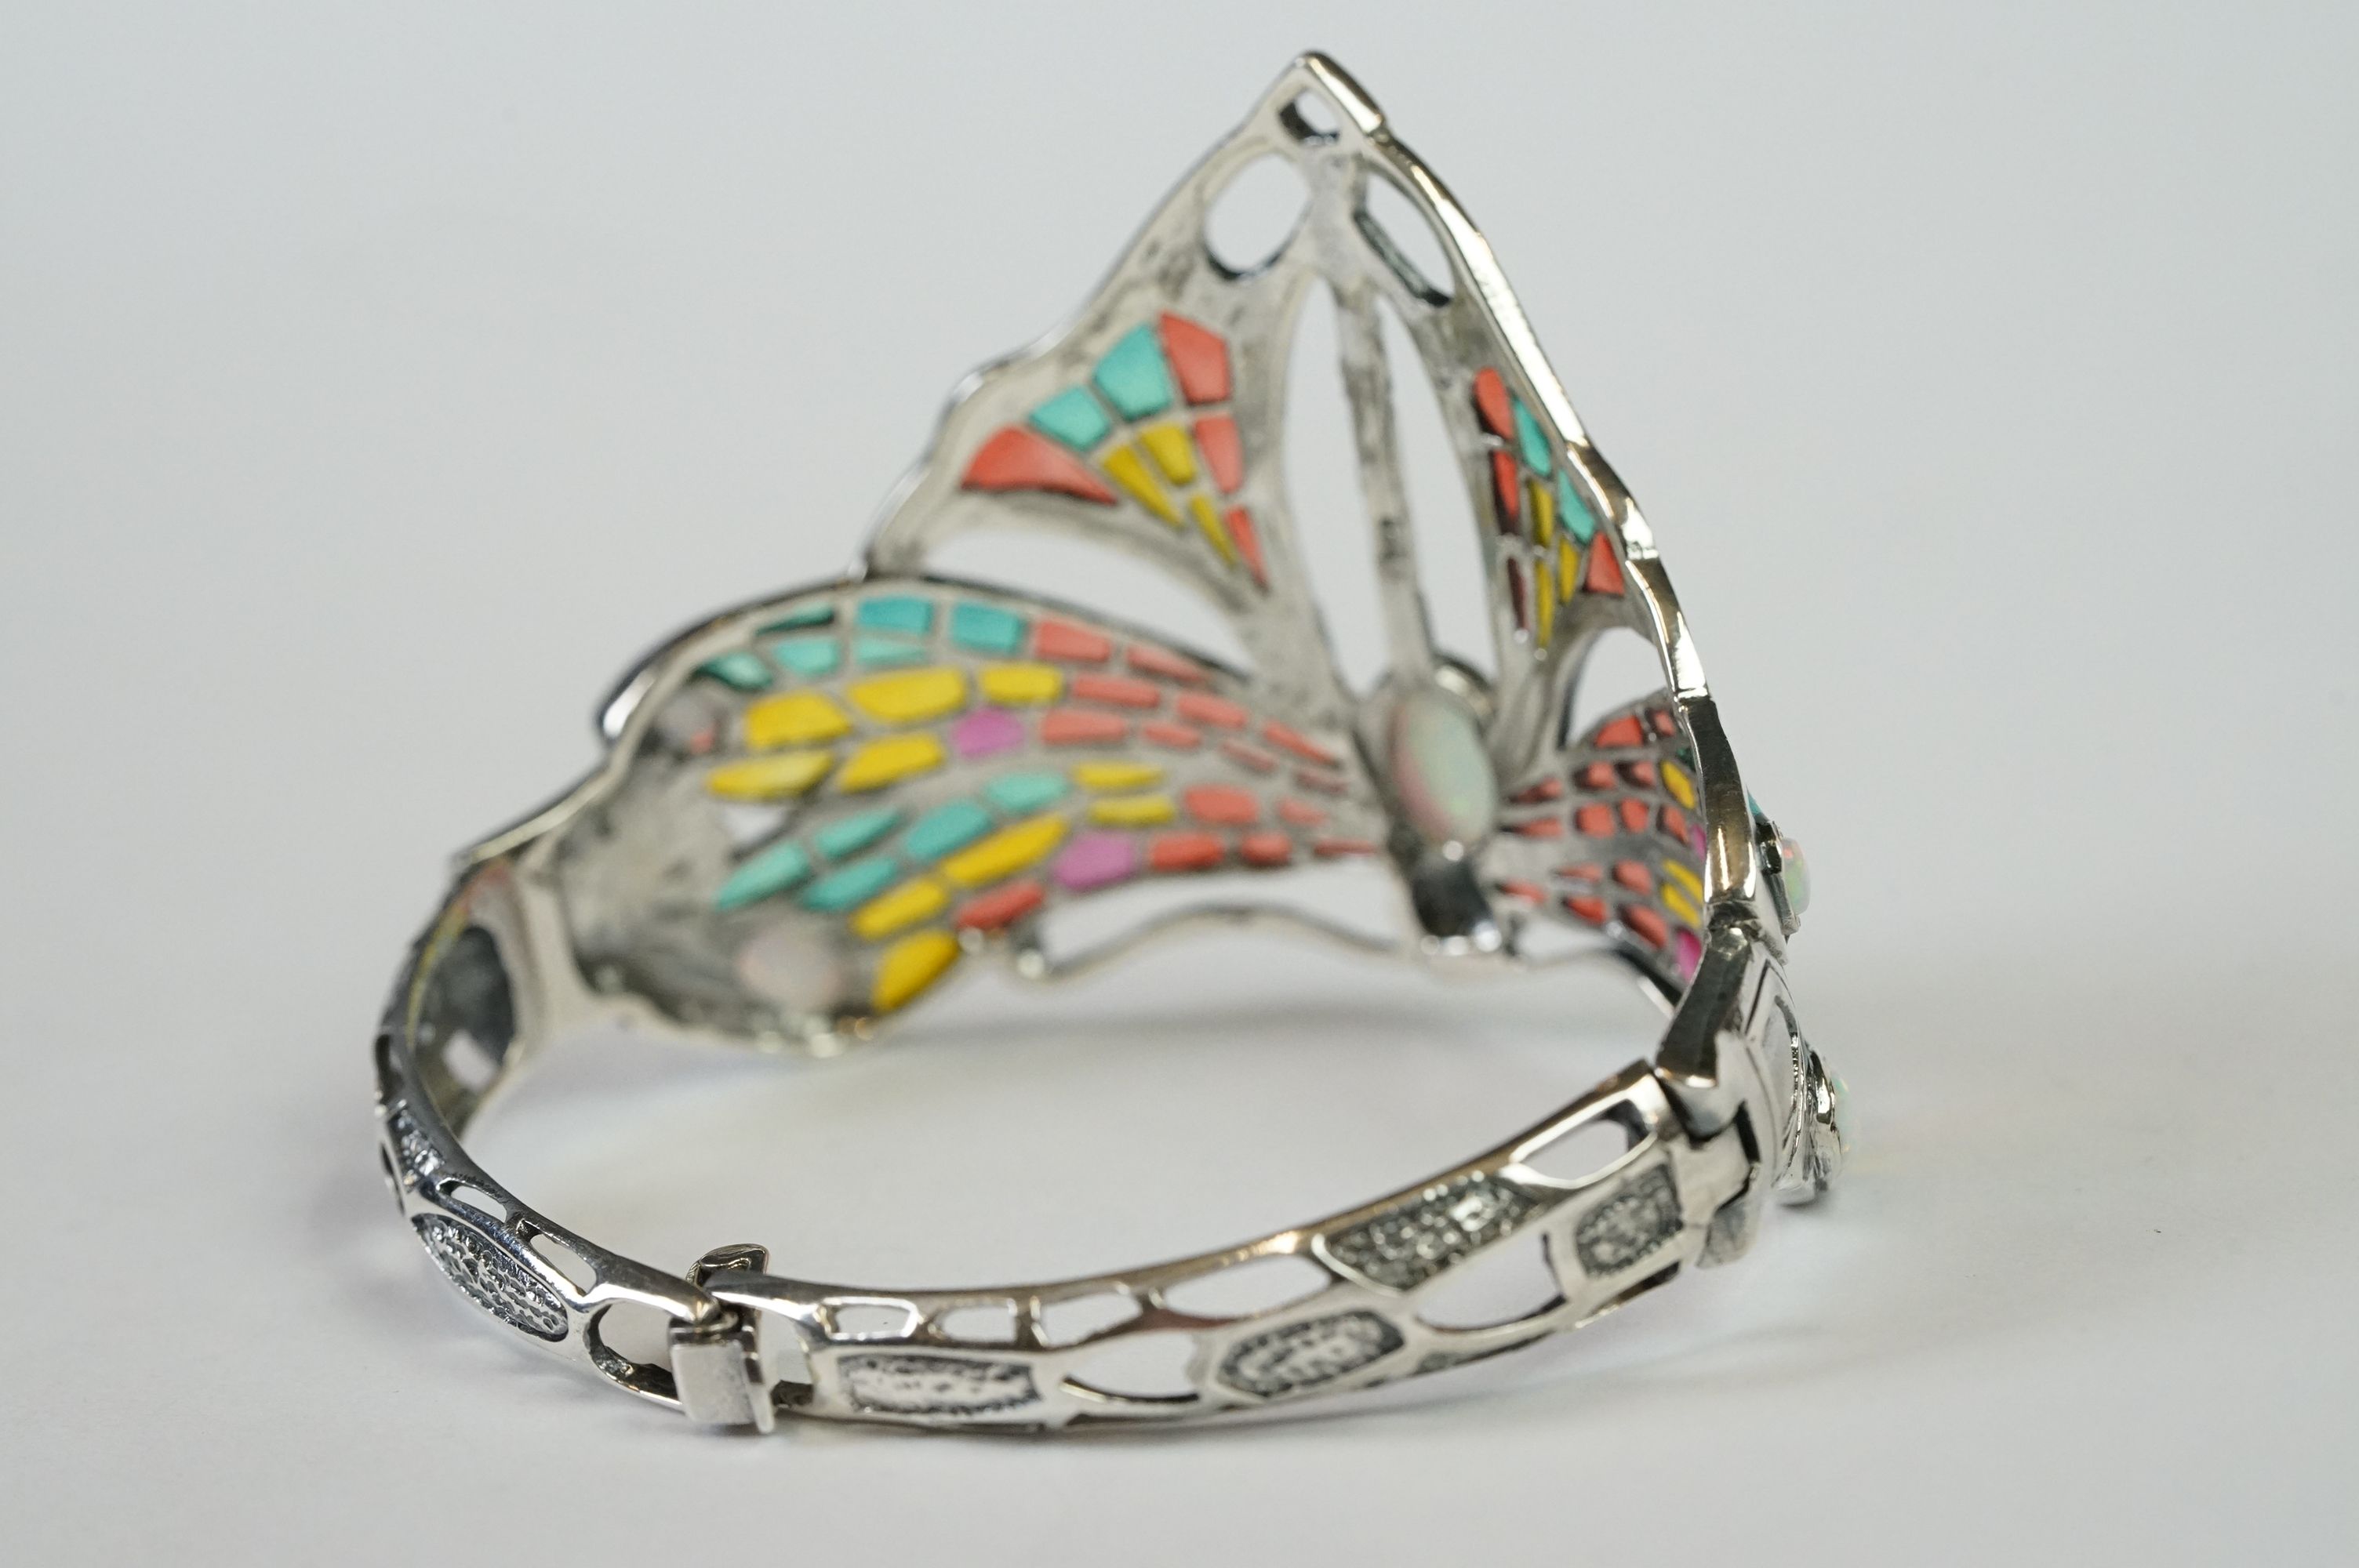 Large Silver Plique a Jour Cuff Bangle in the Art Deco style with opal cabochons - Image 6 of 11